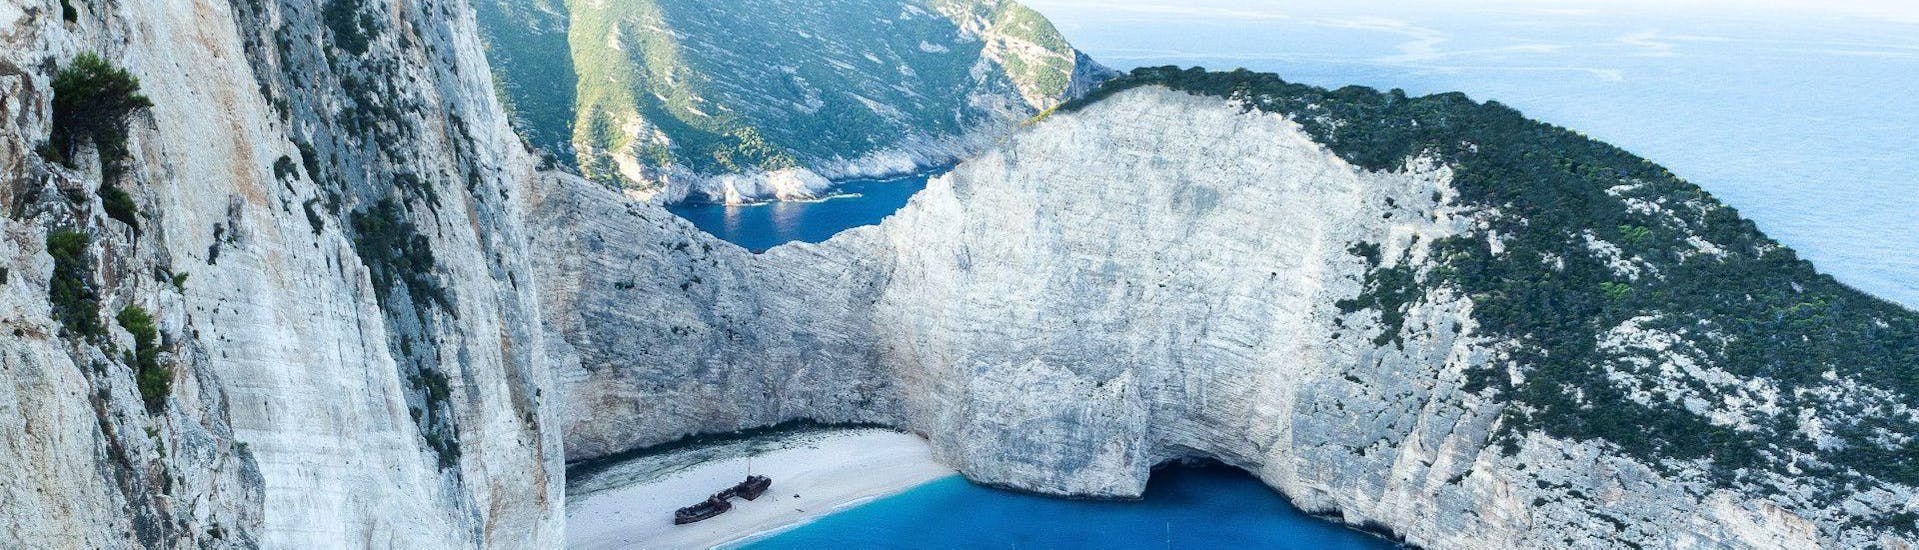 Picture of the shipwreck at Navagio Beach, which you can see during the boat trips with Theodosis Cruises Zakynthos.